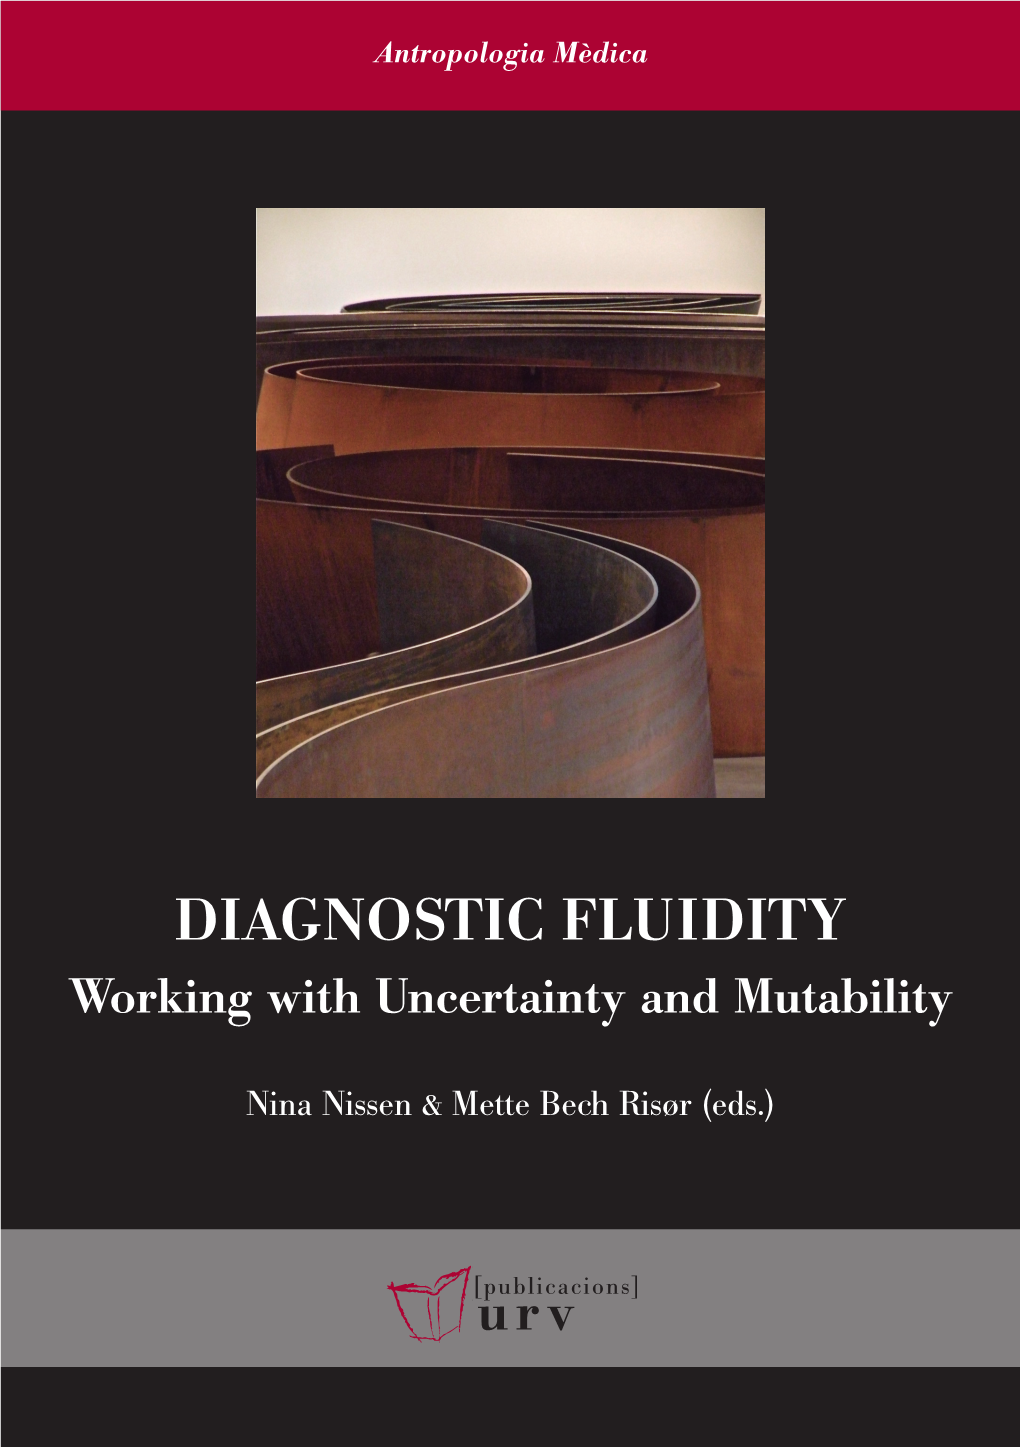 Diagnostic Fluidity: Working with Uncertainty and Mutability